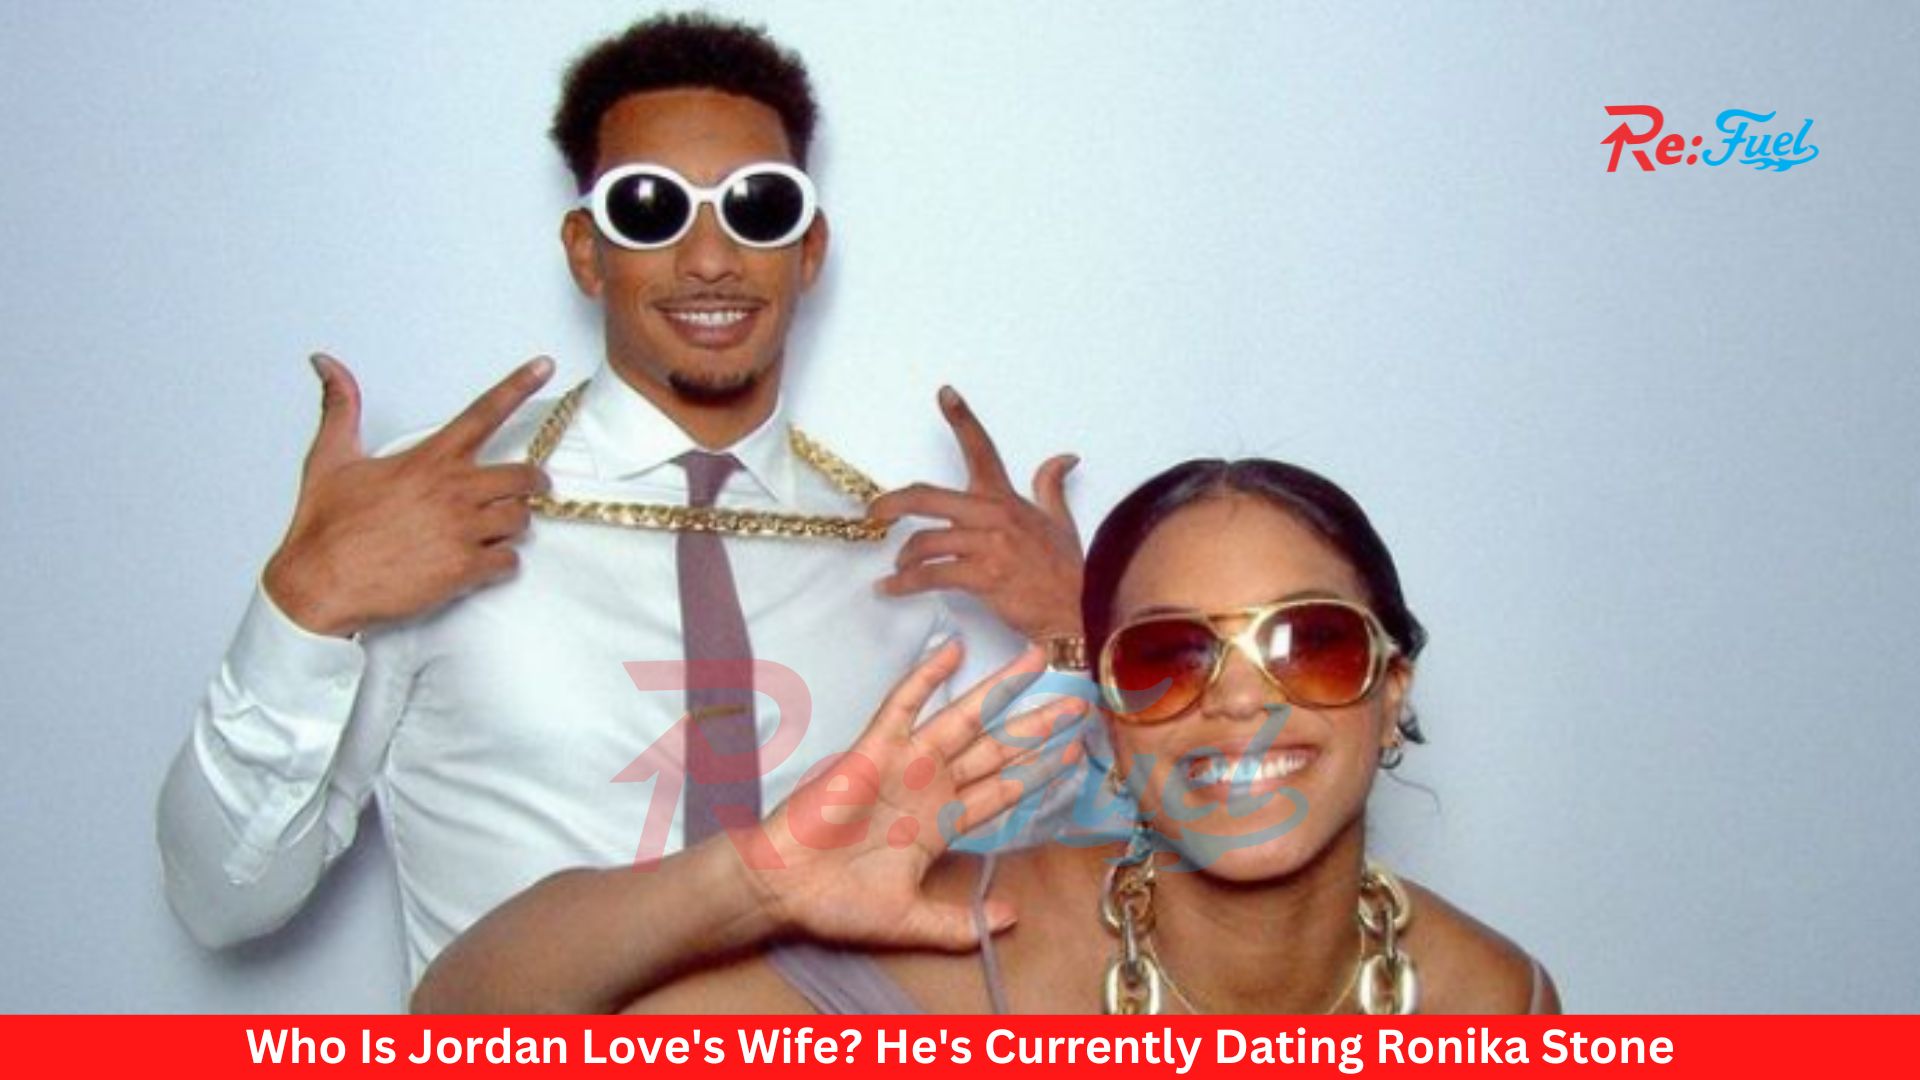 Who Is Jordan Love's Wife? He's Currently Dating Ronika Stone